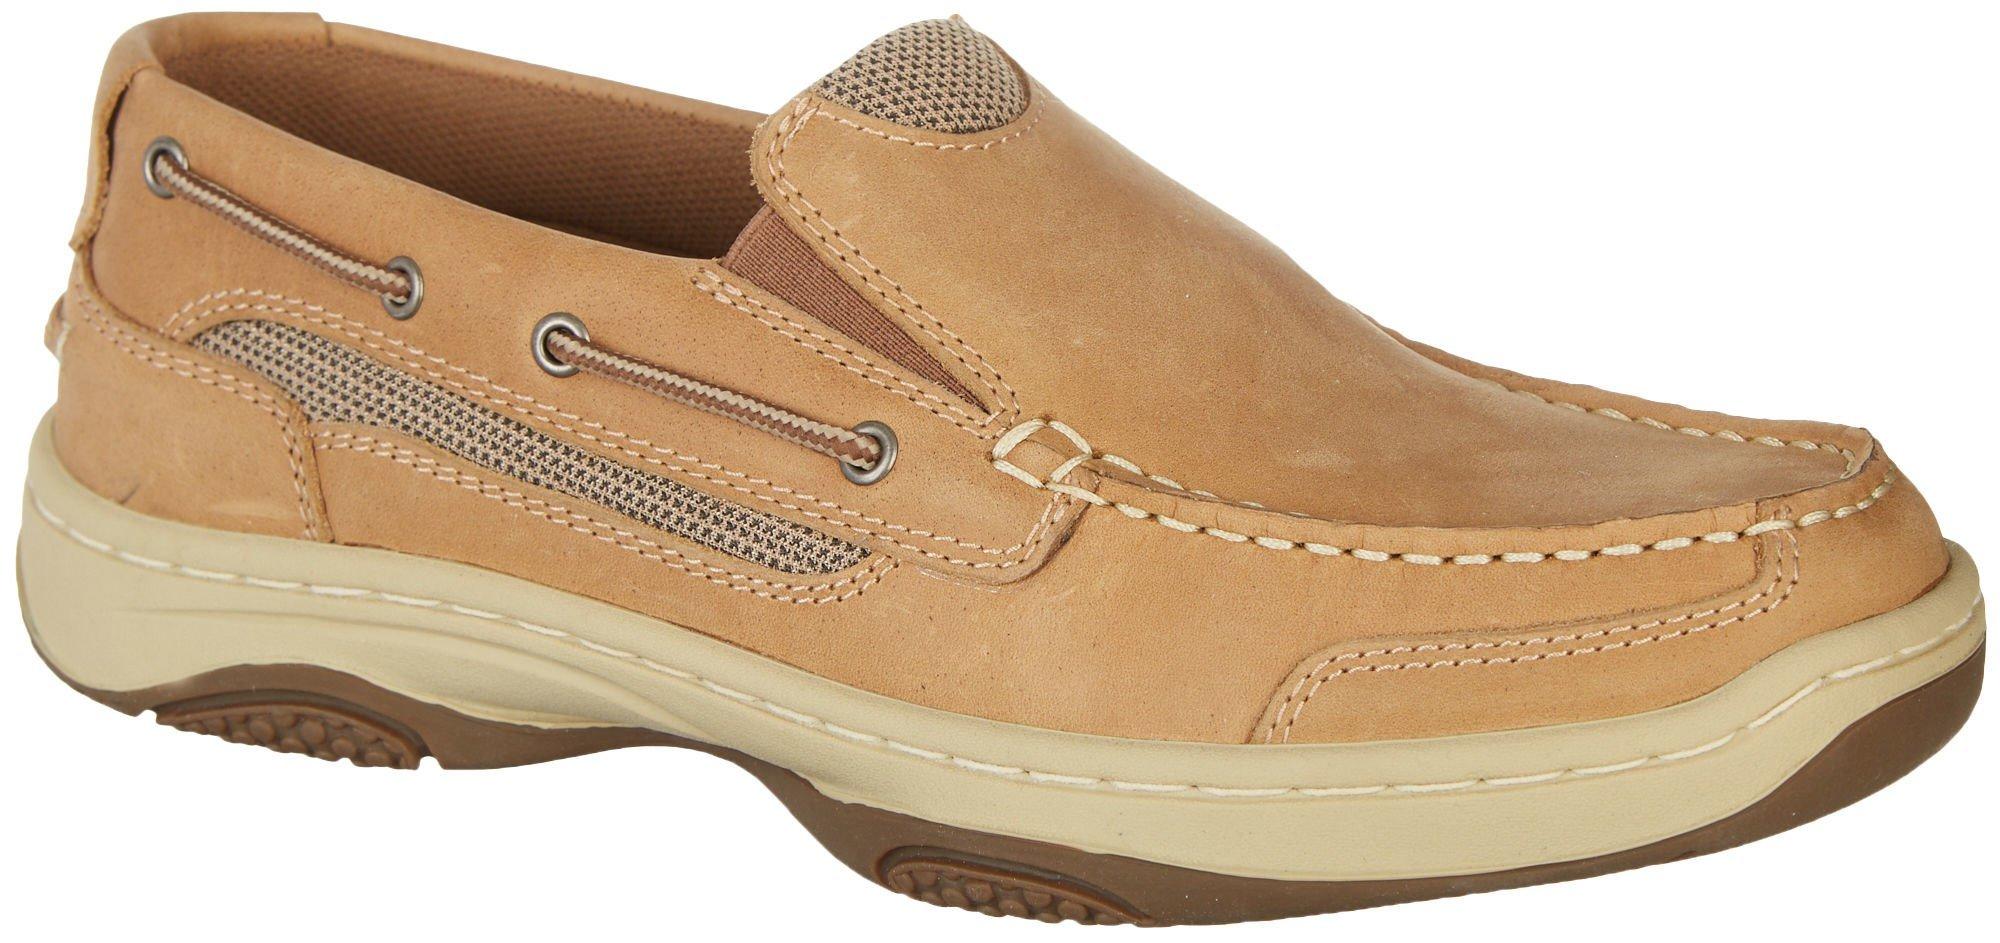 mens leather slip on boat shoes